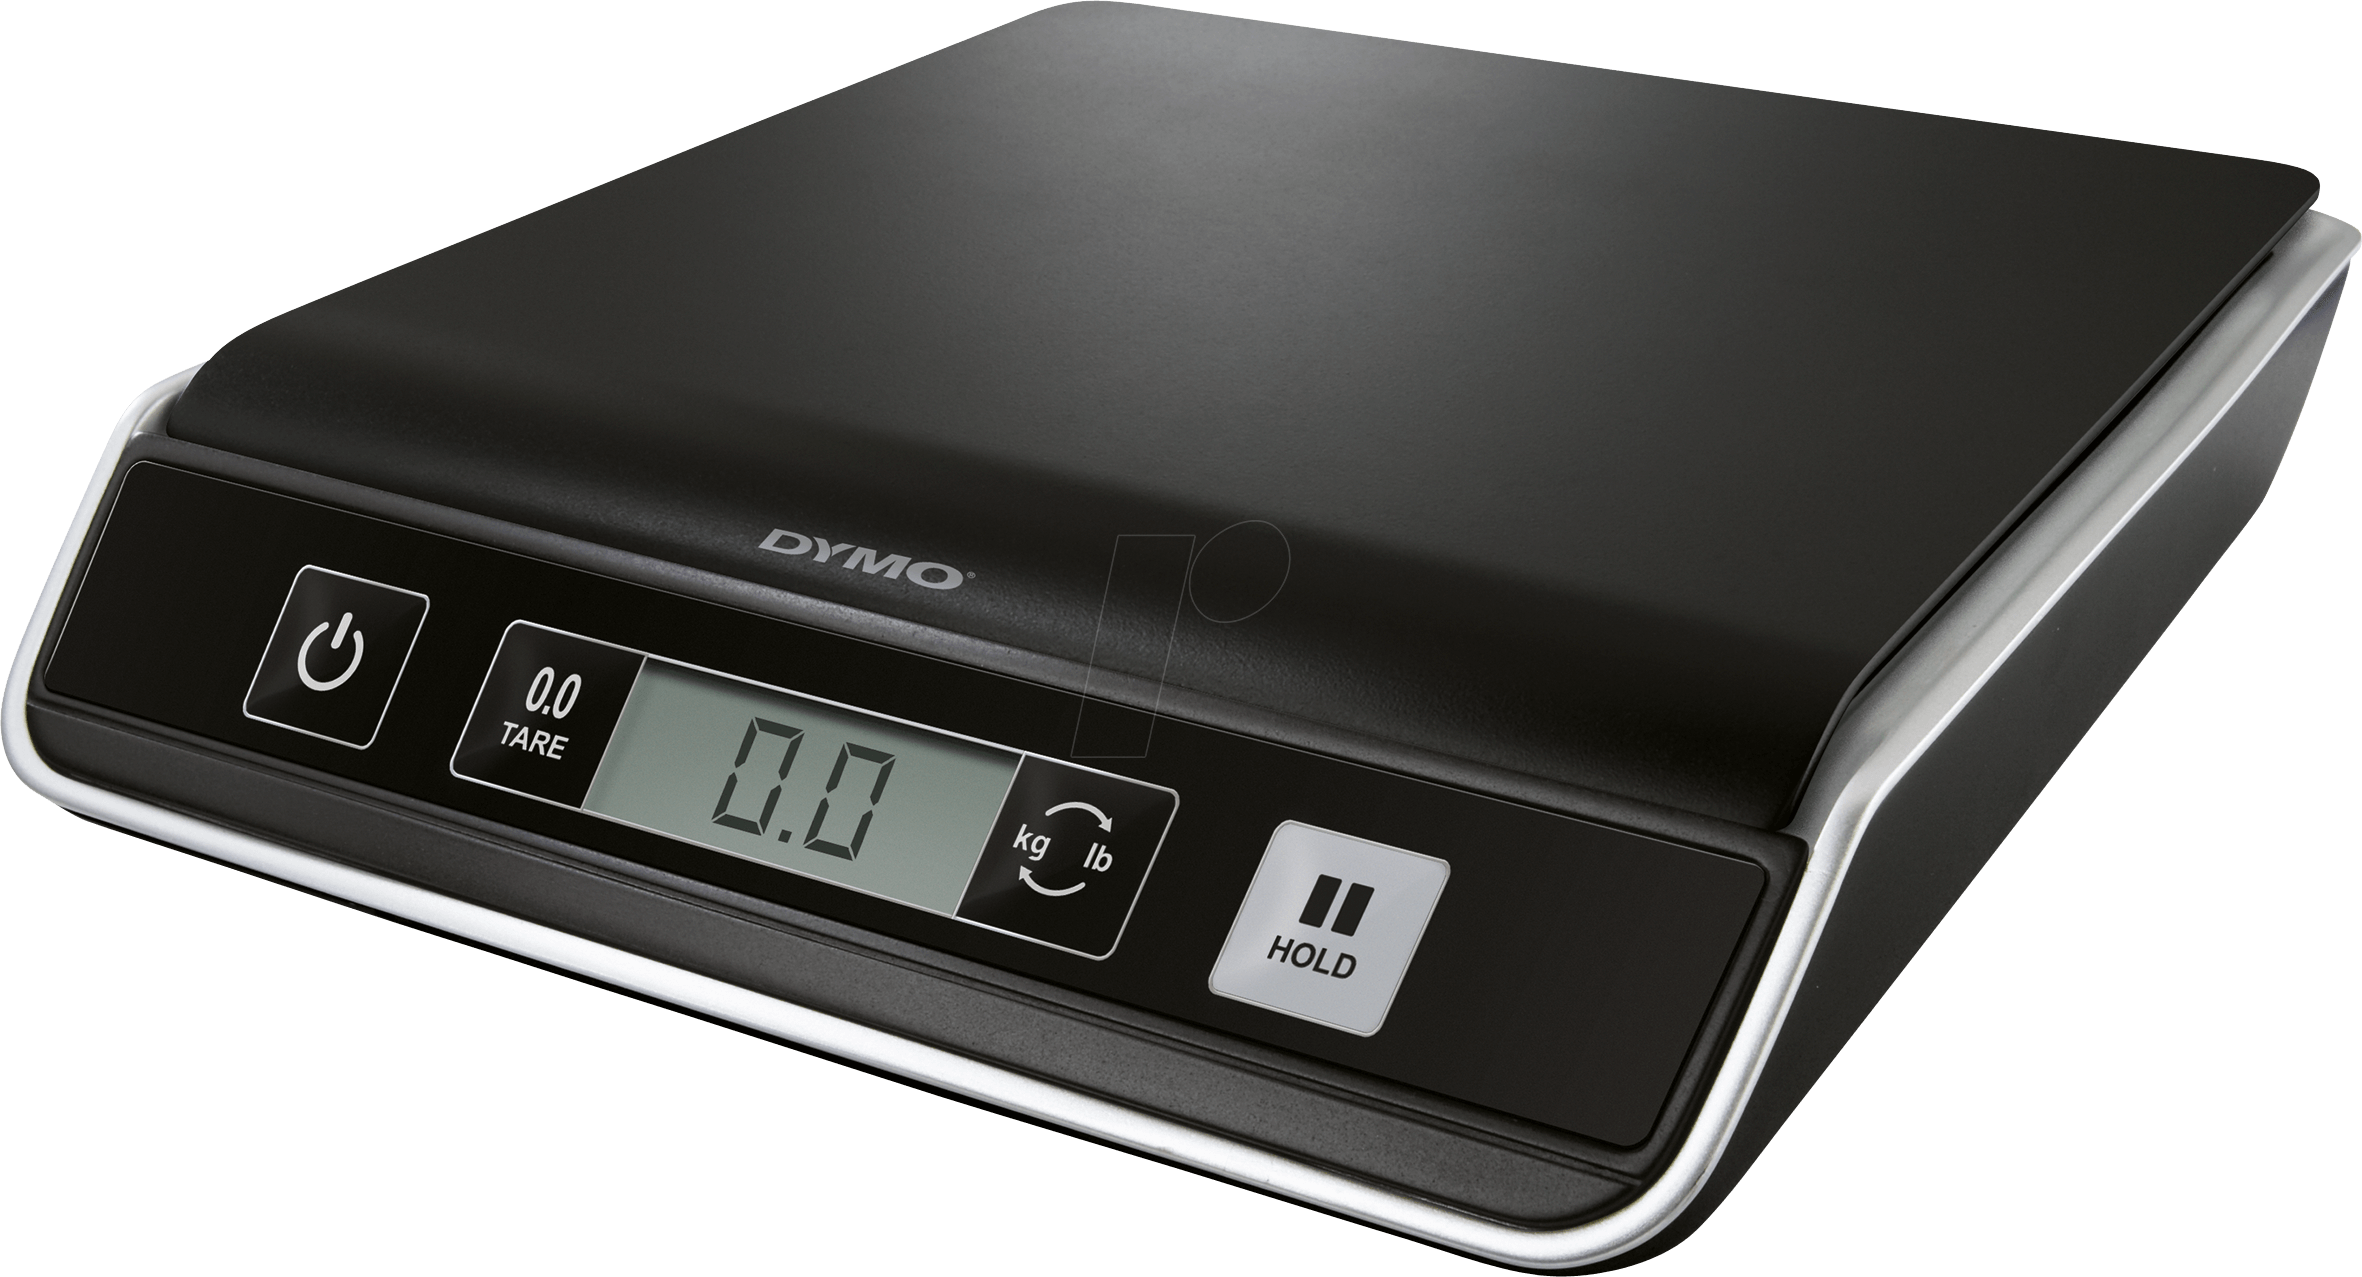 Digital Scale Png - Dymo M5 Digital Postal Scale 5kg 2g Increments S0929000 (2362x1277), Png Download